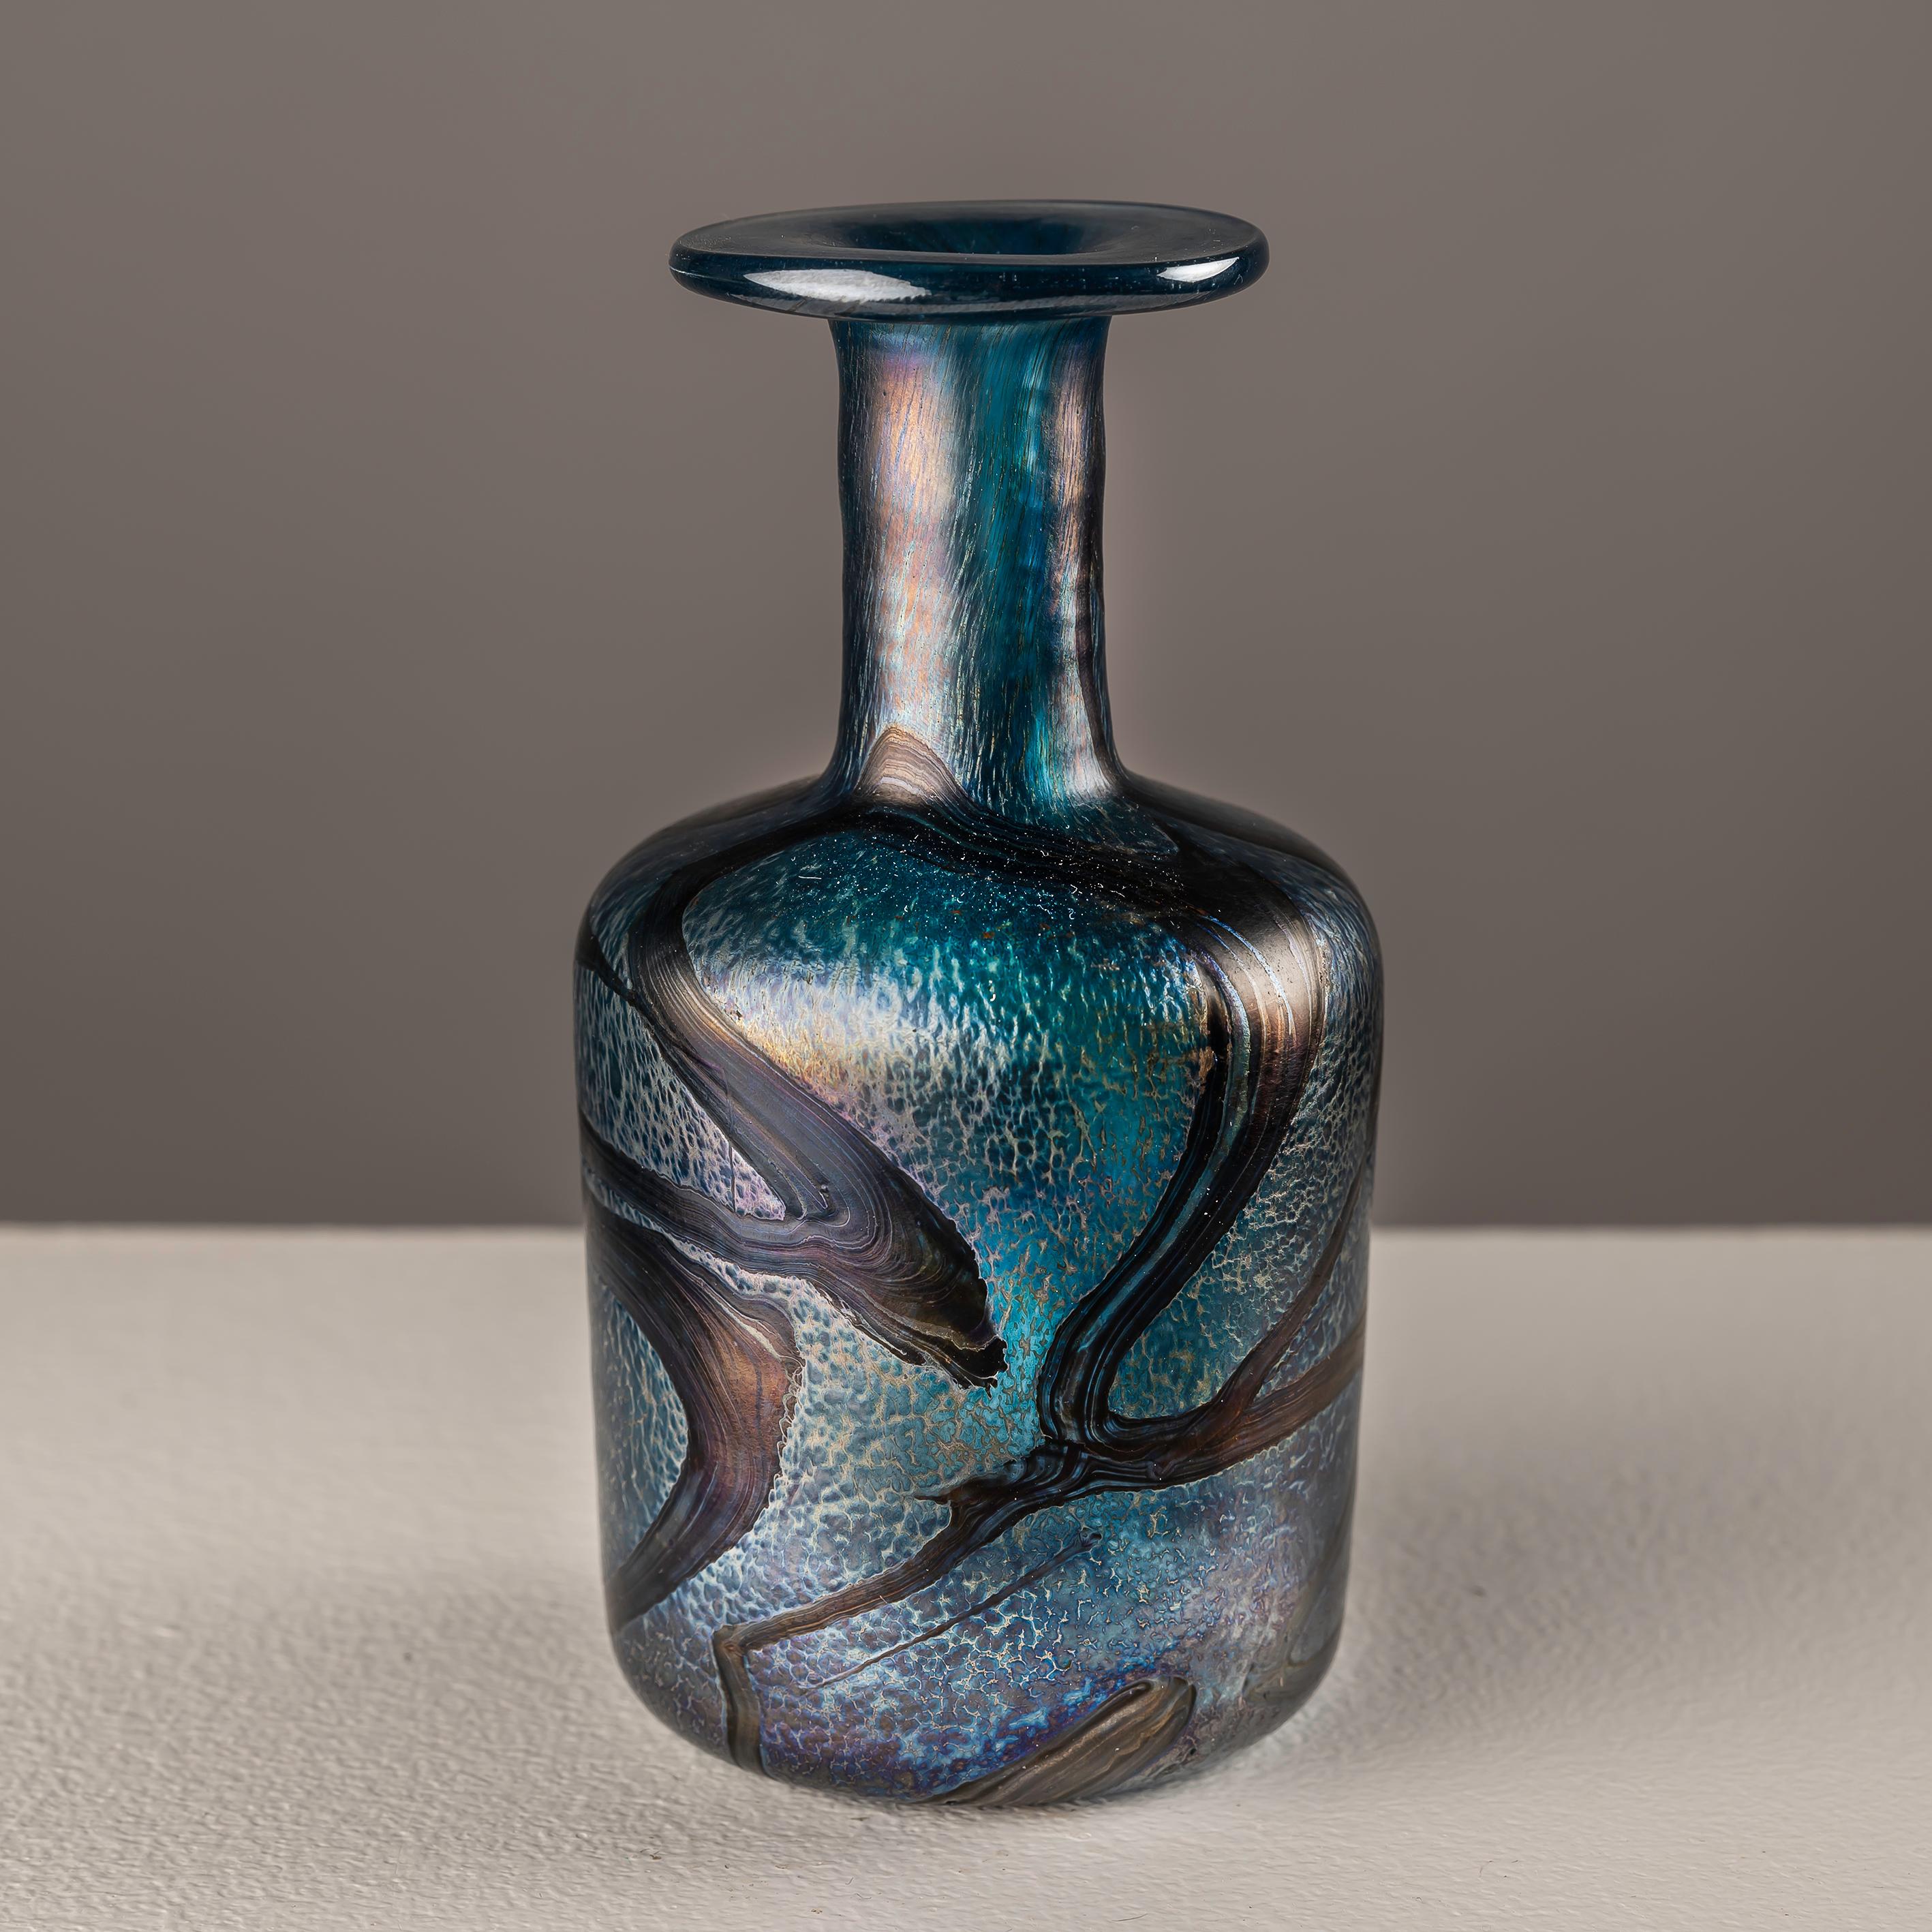 This iridescent glass vase, bearing a signature, holds a unique charm and significance. Its beauty lies not only in its mesmerizing iridescence, which reflects a spectrum of colors in the light, but also in the presence of the signature. The